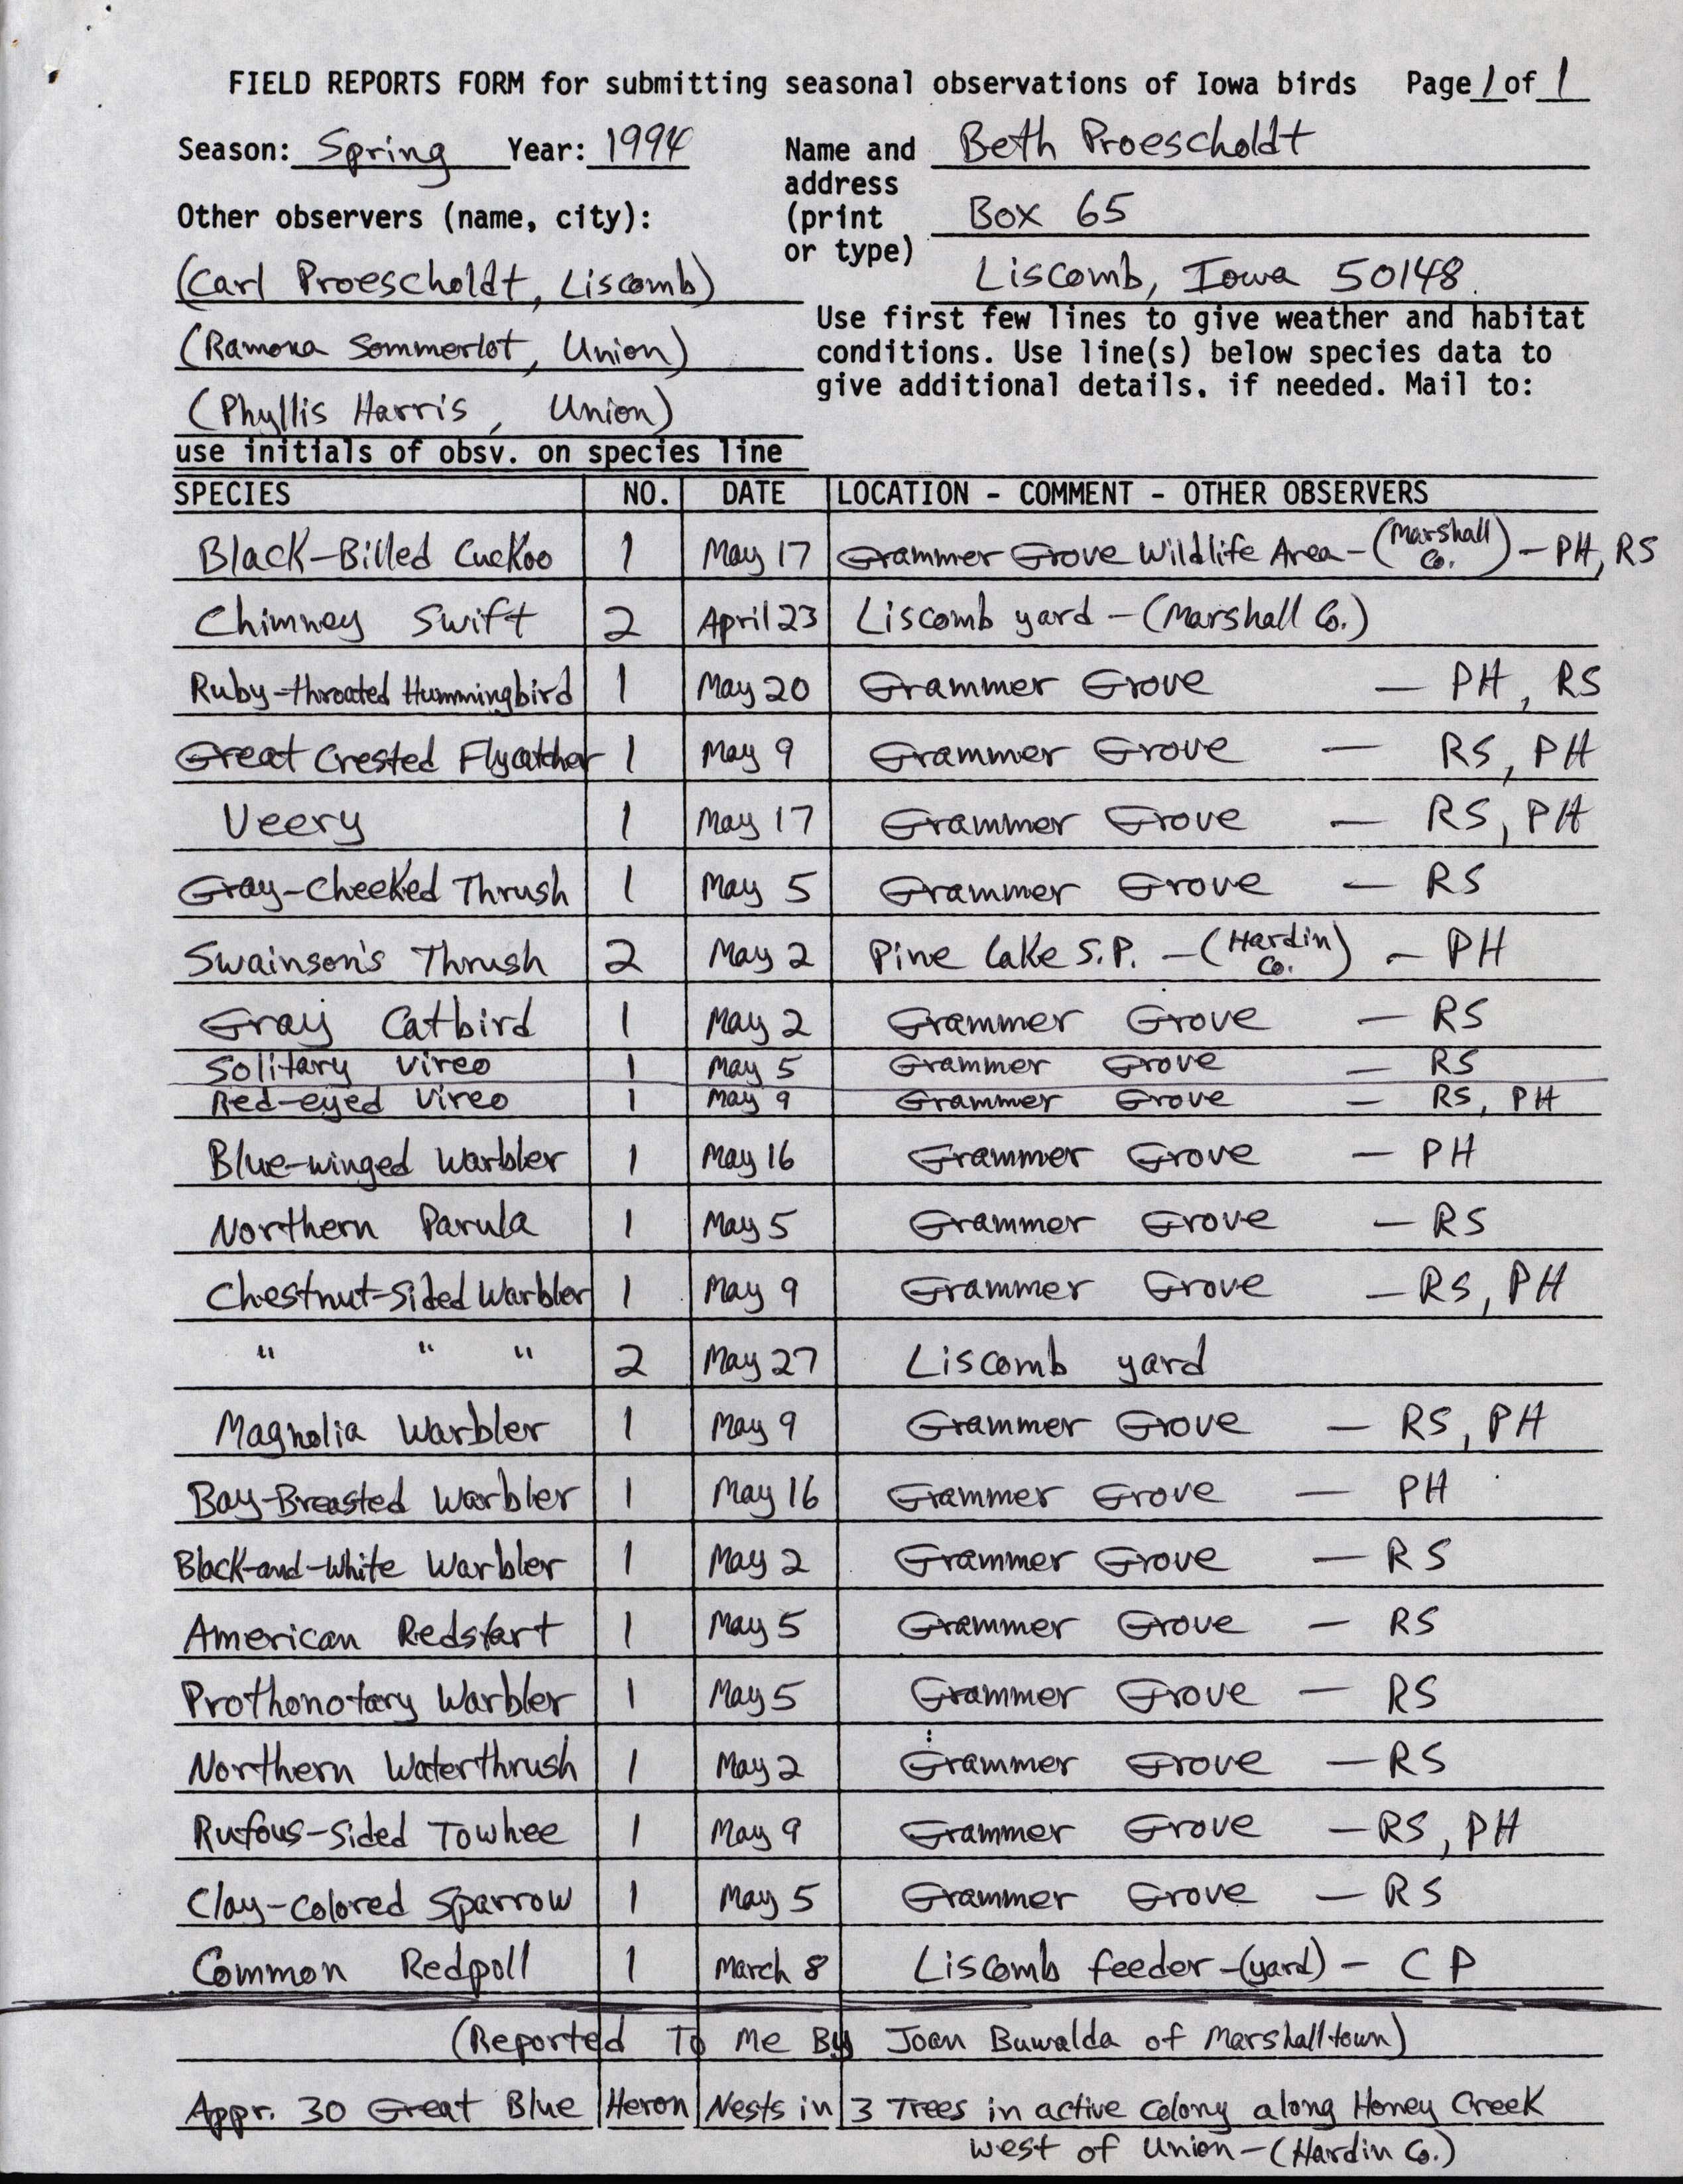 Field reports form for submitting seasonal observations of Iowa birds, Beth Proescholdt, Spring 1994